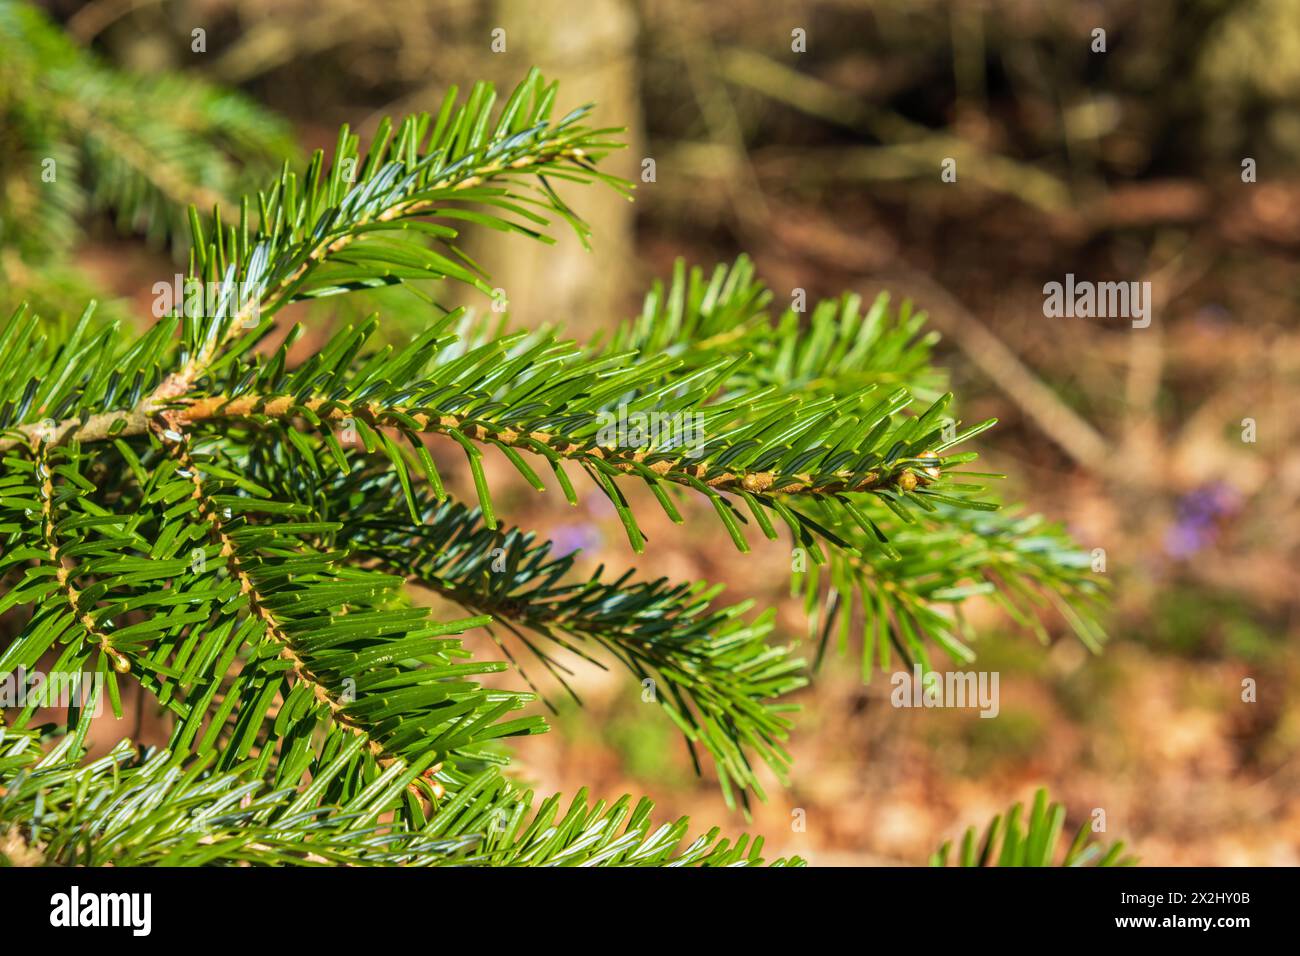 Branch of a Veitch's silver-fir (Abies veitchii) with green needles in a woodland Stock Photo